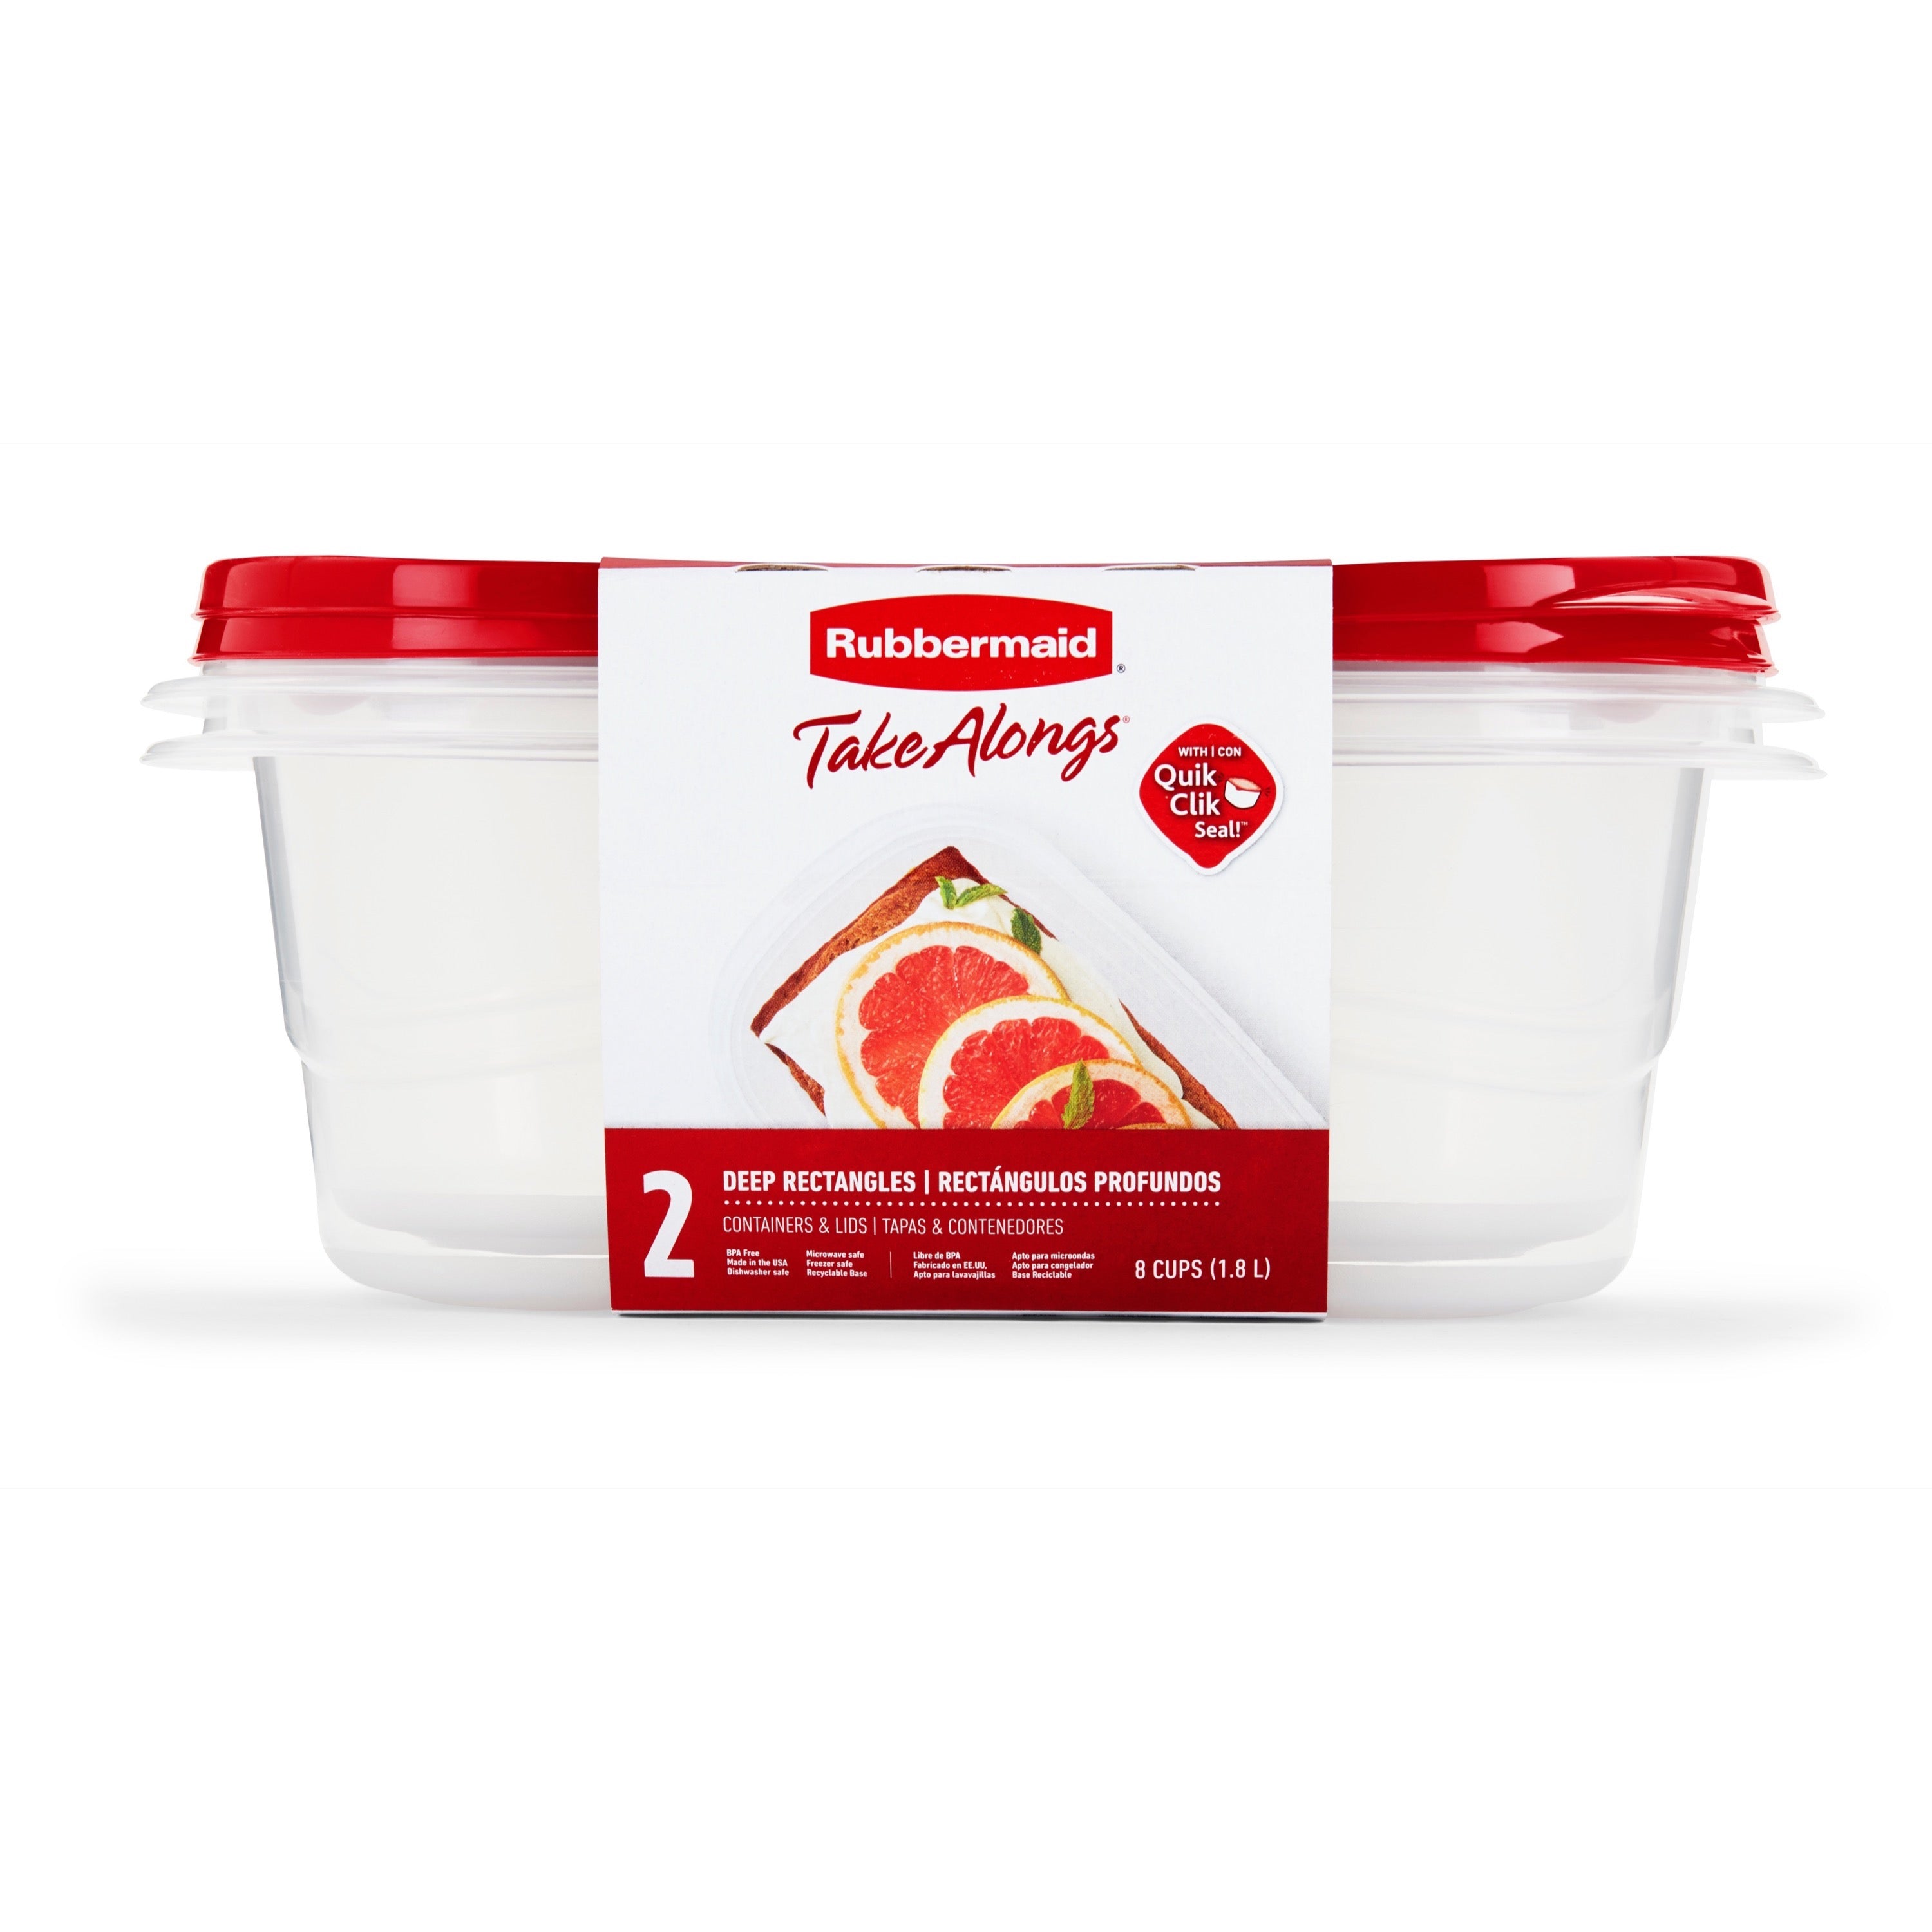 Rubbermaid Takealongs Deep Rectangle Food Storage Container, 1.8 (2 Pack)